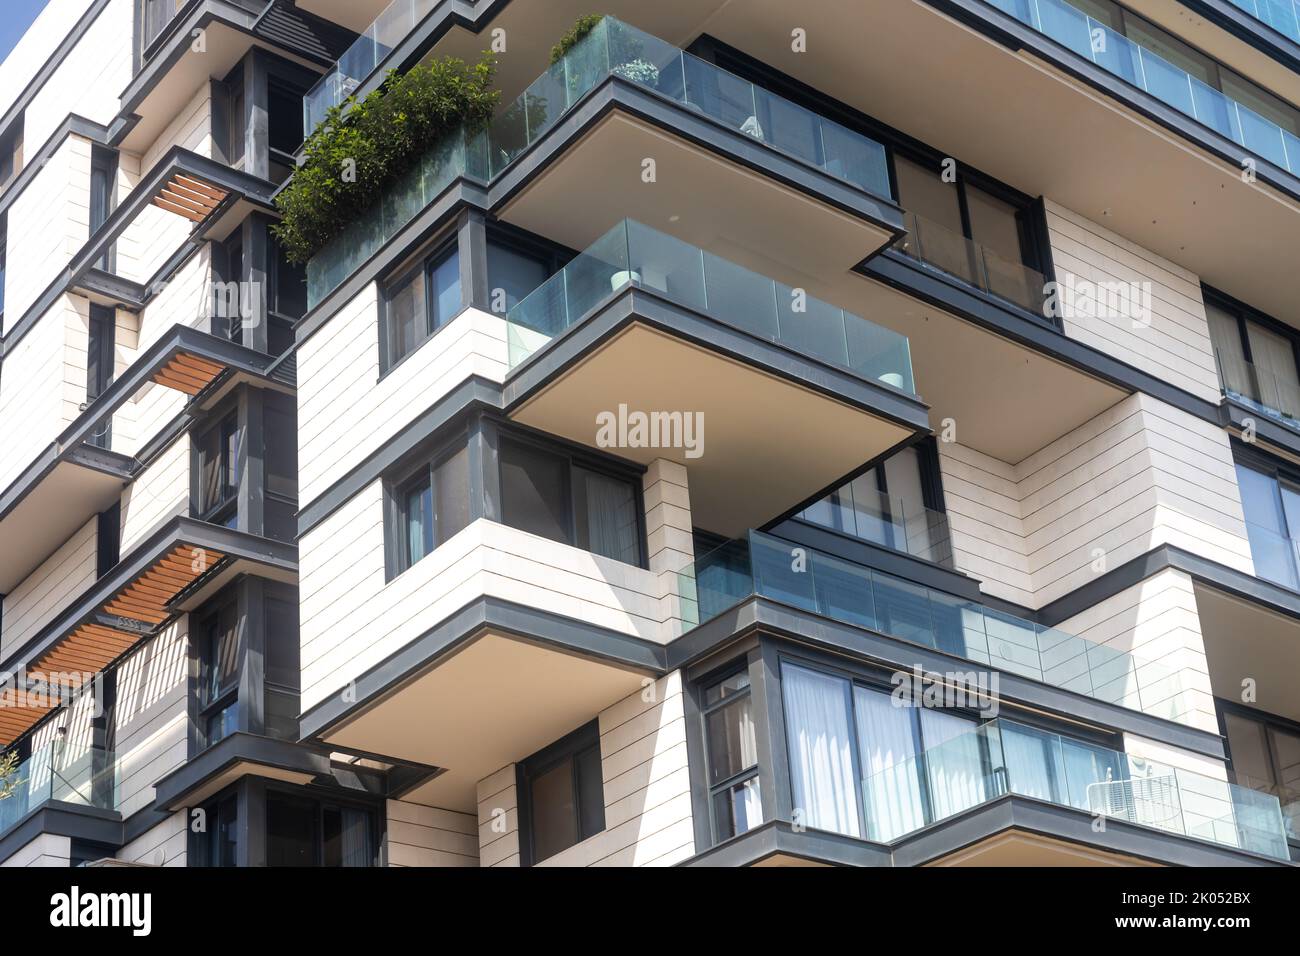 View on balconies of modern apartments exterior at daylight Stock Photo